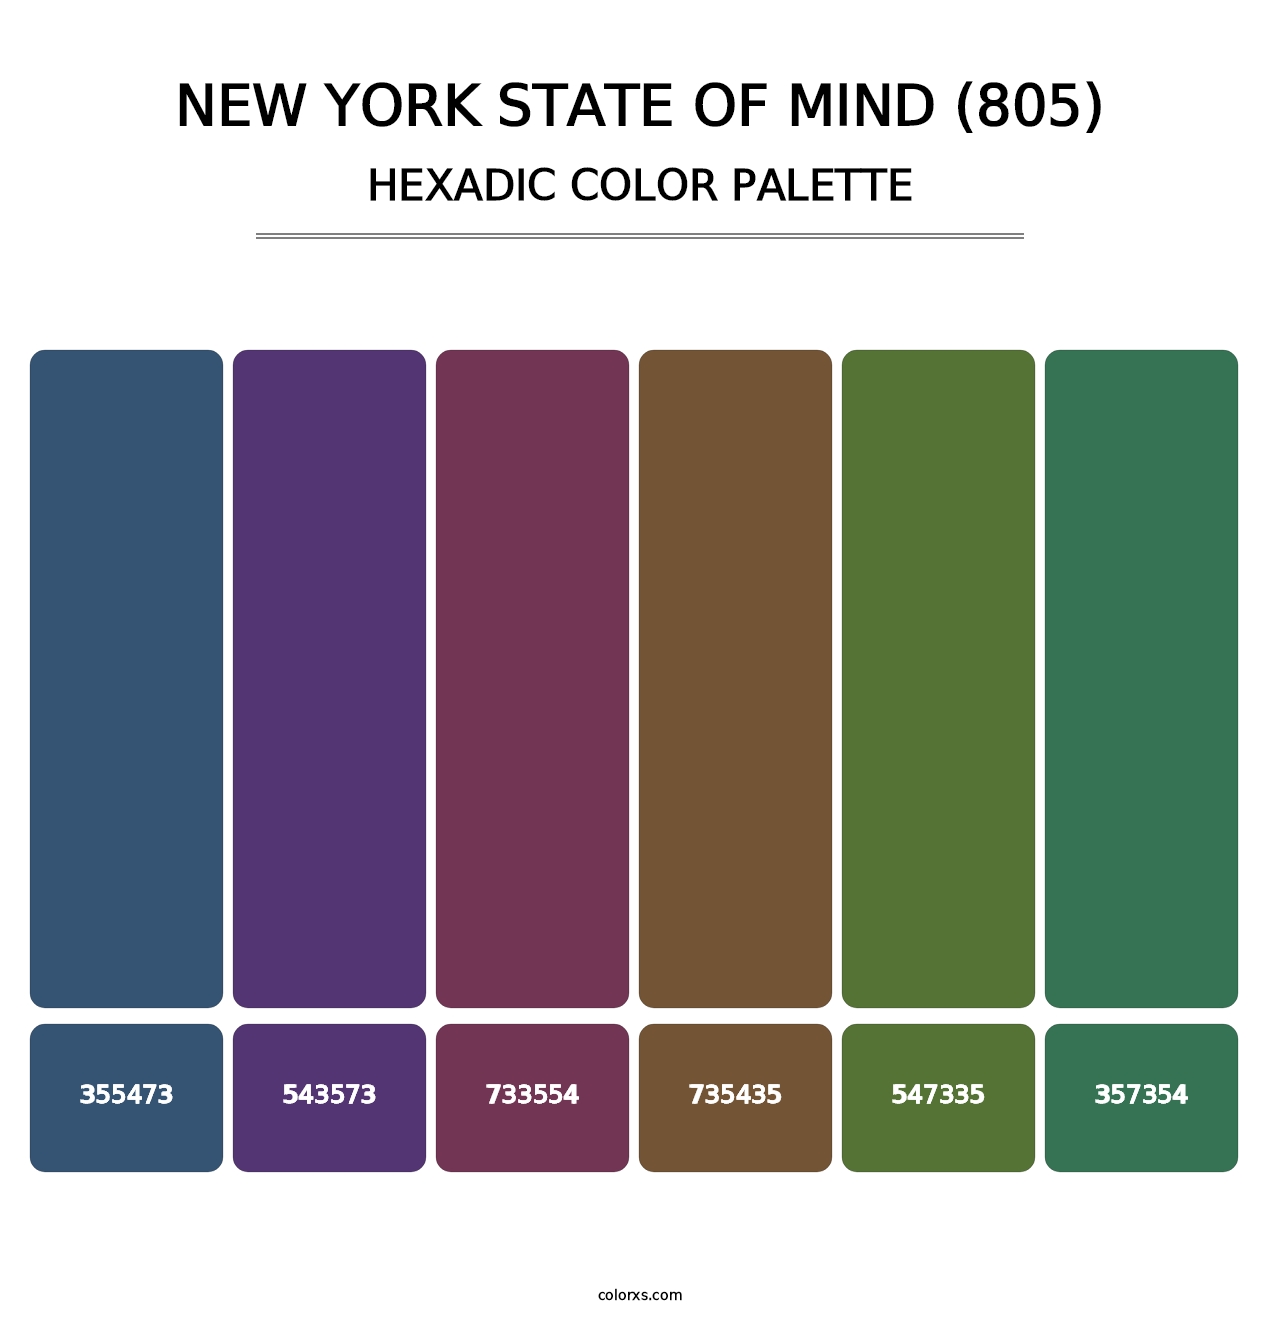 New York State of Mind (805) - Hexadic Color Palette